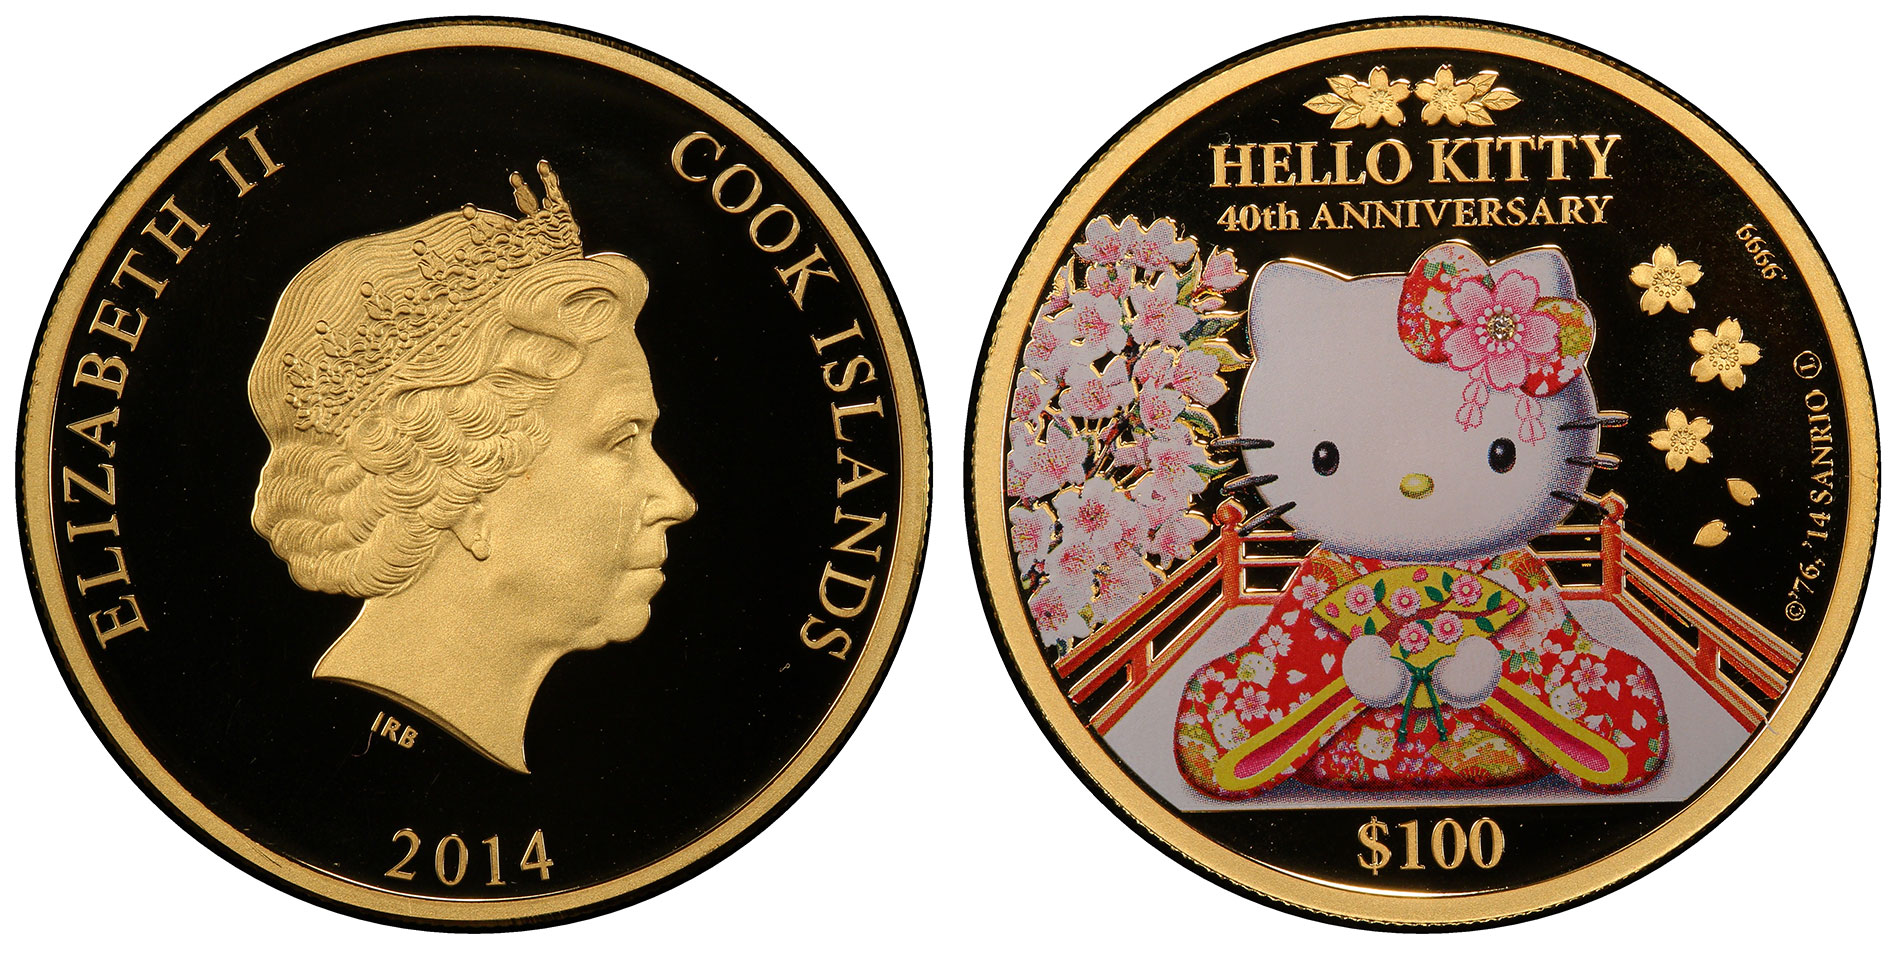 Hello Kitty and Her Coinage